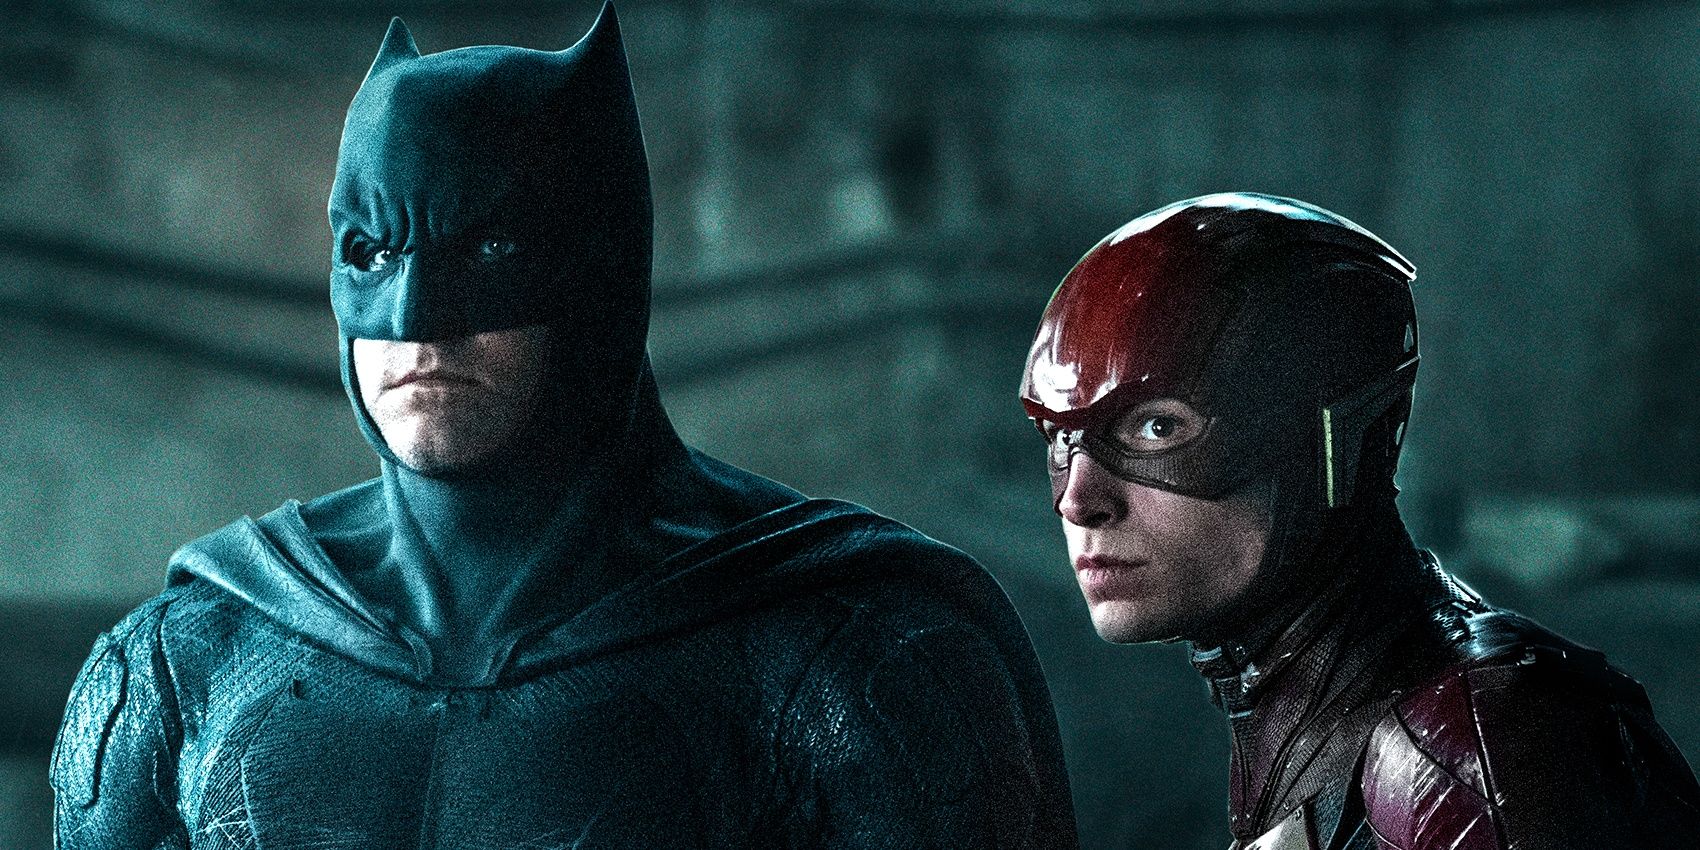 Batman and Flash in 2017's Justice League